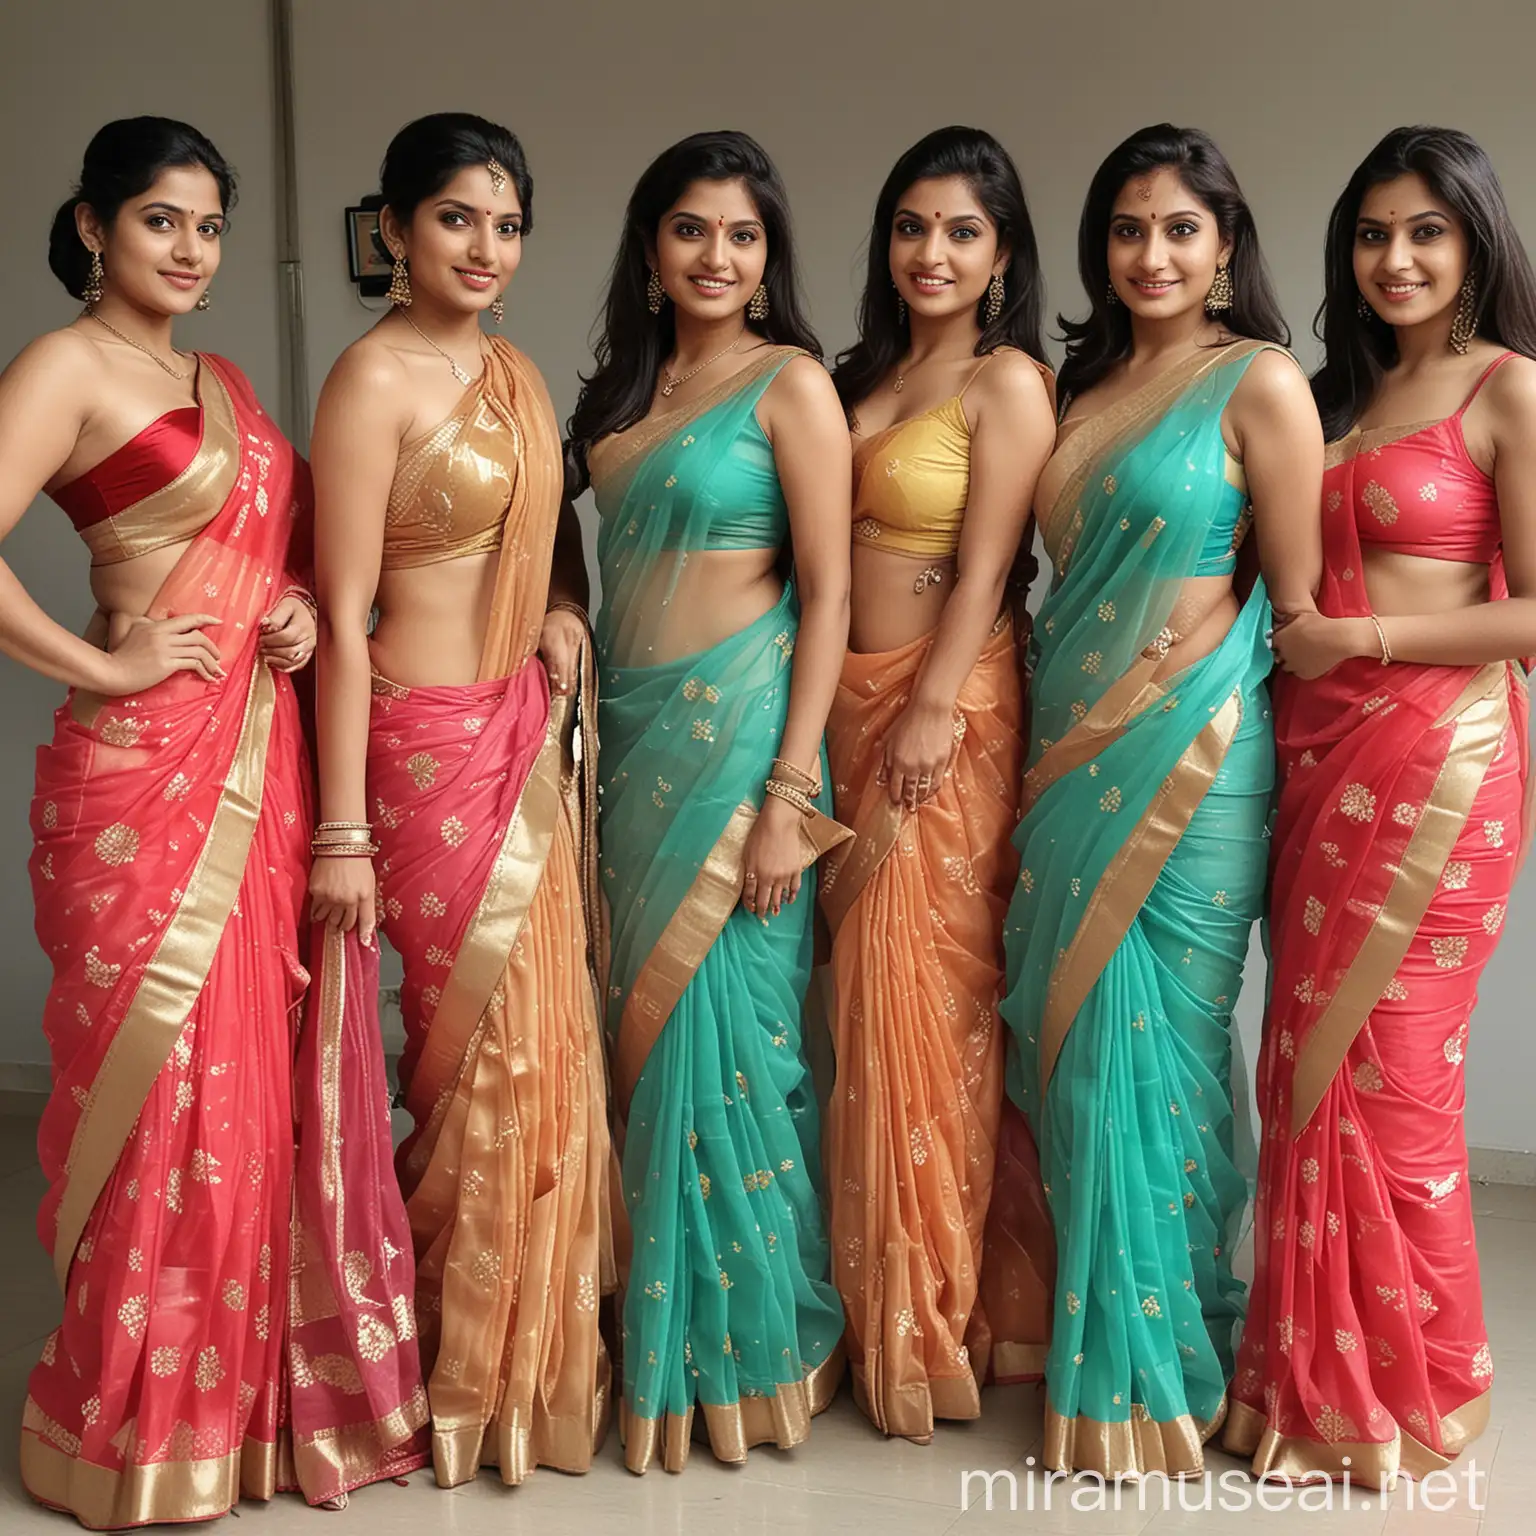 group of indian sexy girls wearing sexy saree